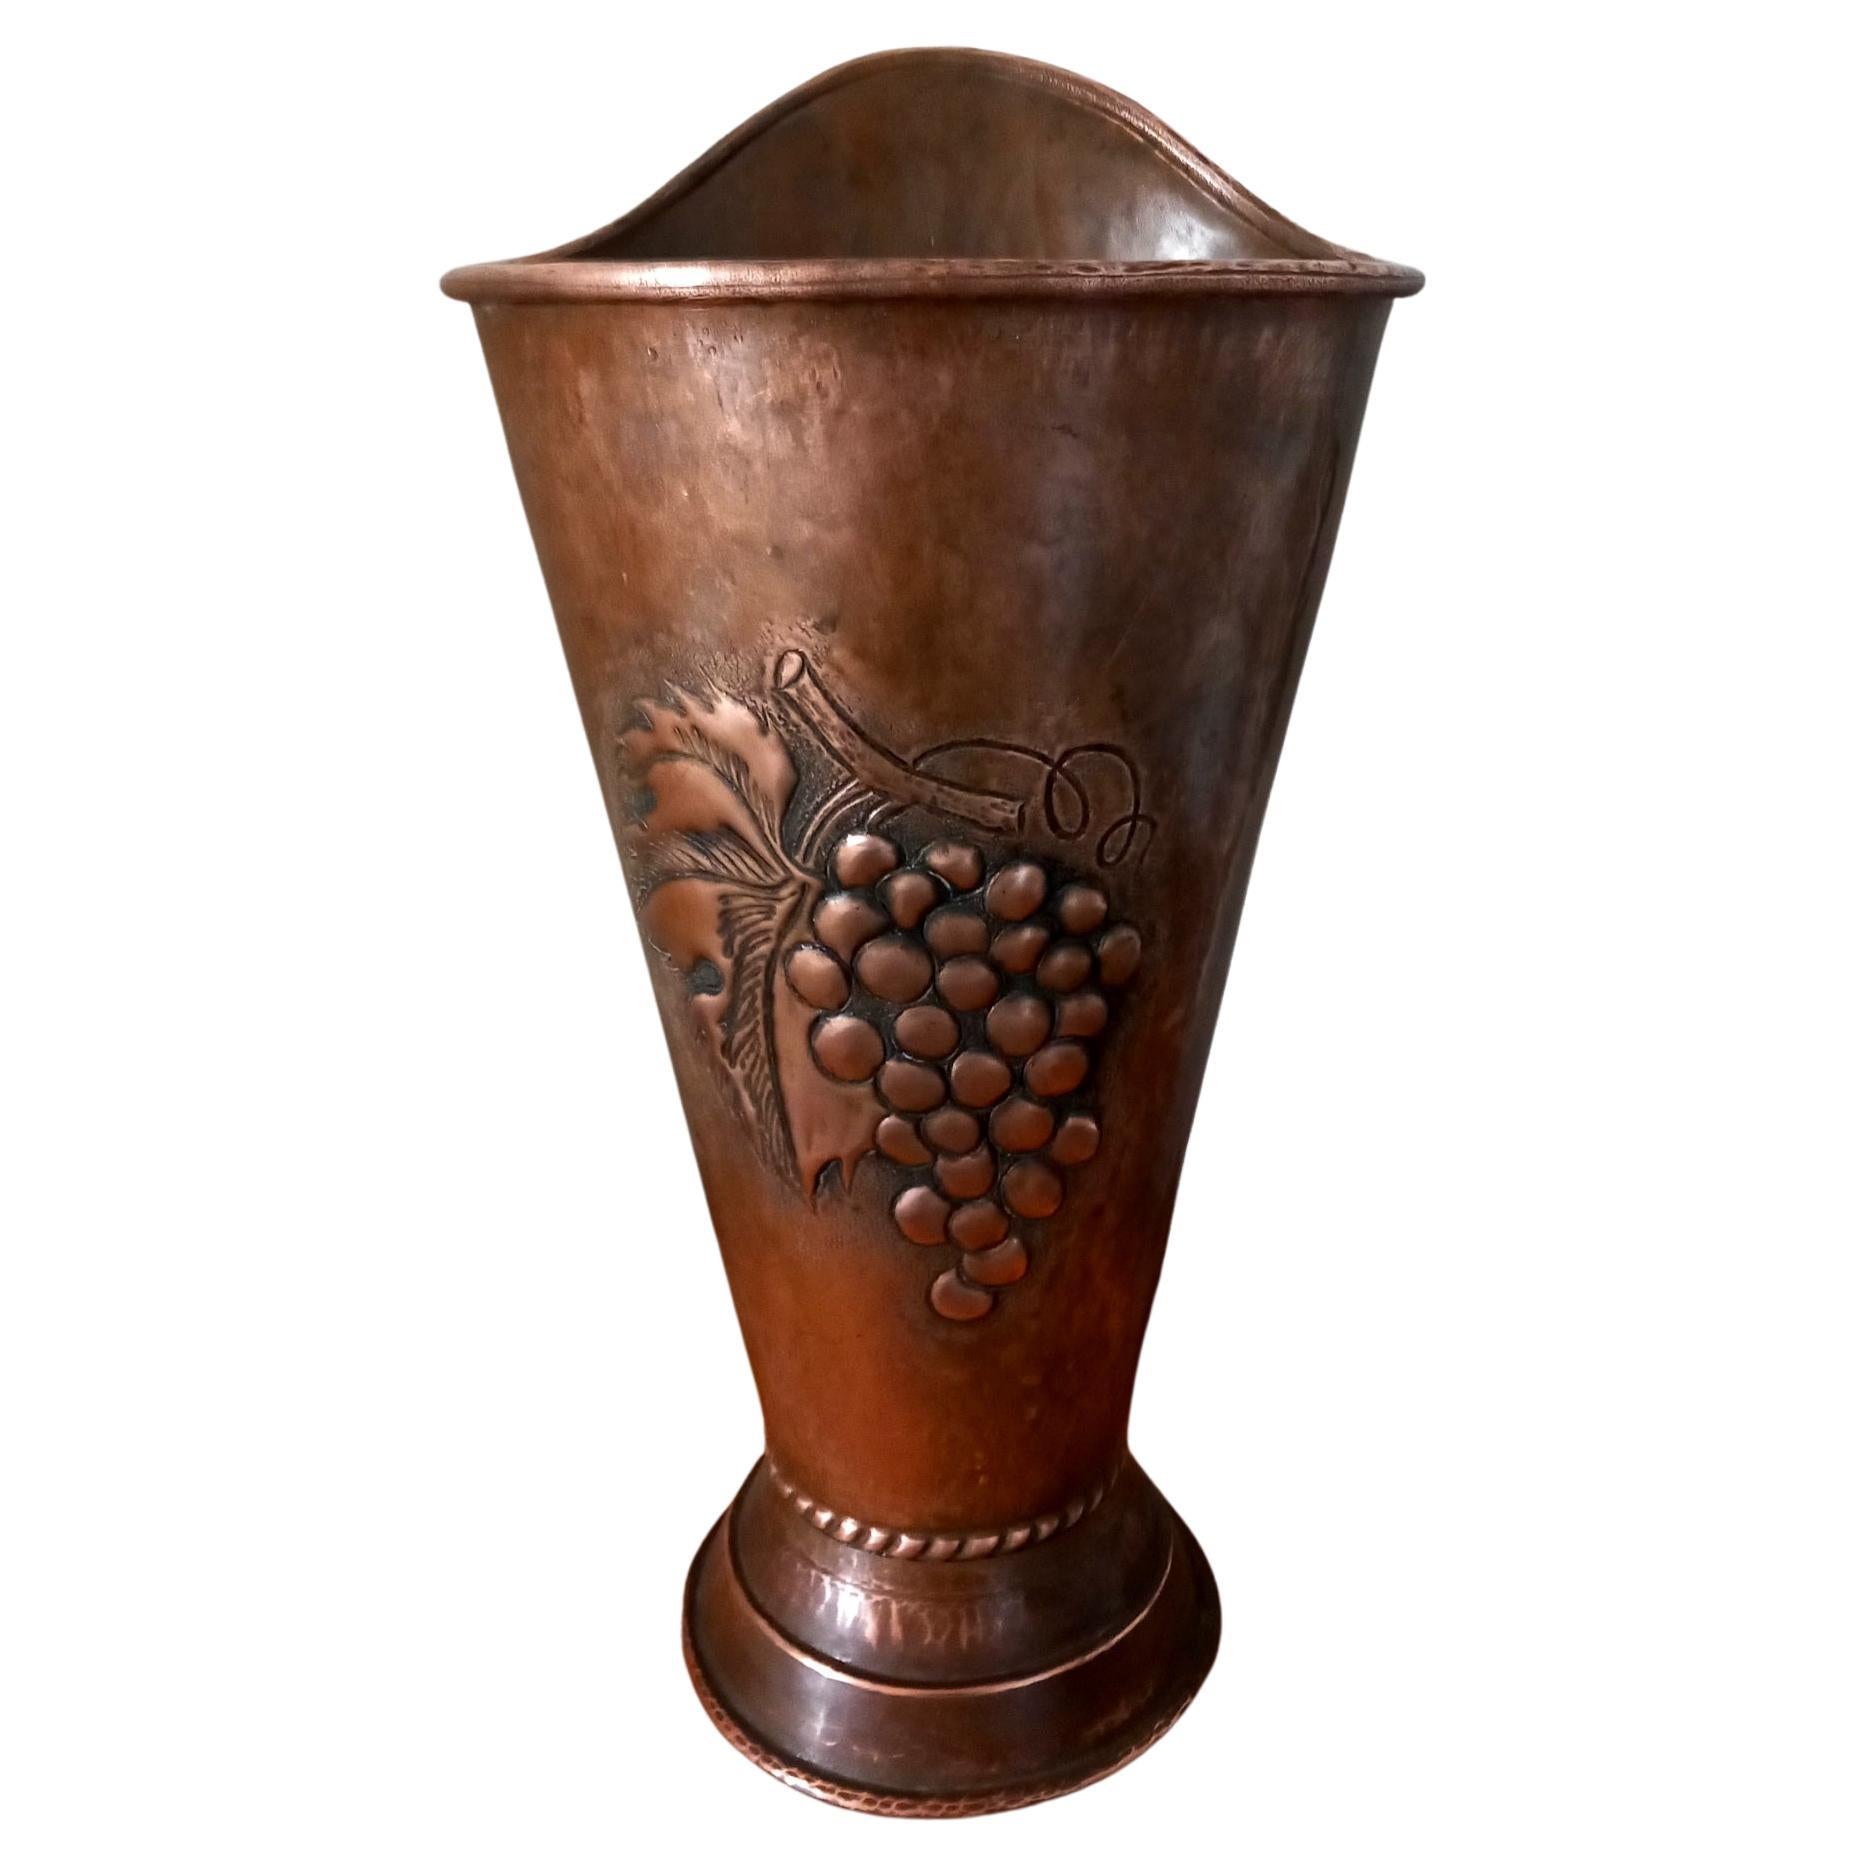 Beautiful solid copper umbrella stand. It is made with thick hammered copper and with a central bunch of grapes design embossed in the copper.

 Beautiful umbrella stand to put at the entrance of your house. It is discreet but at the same time